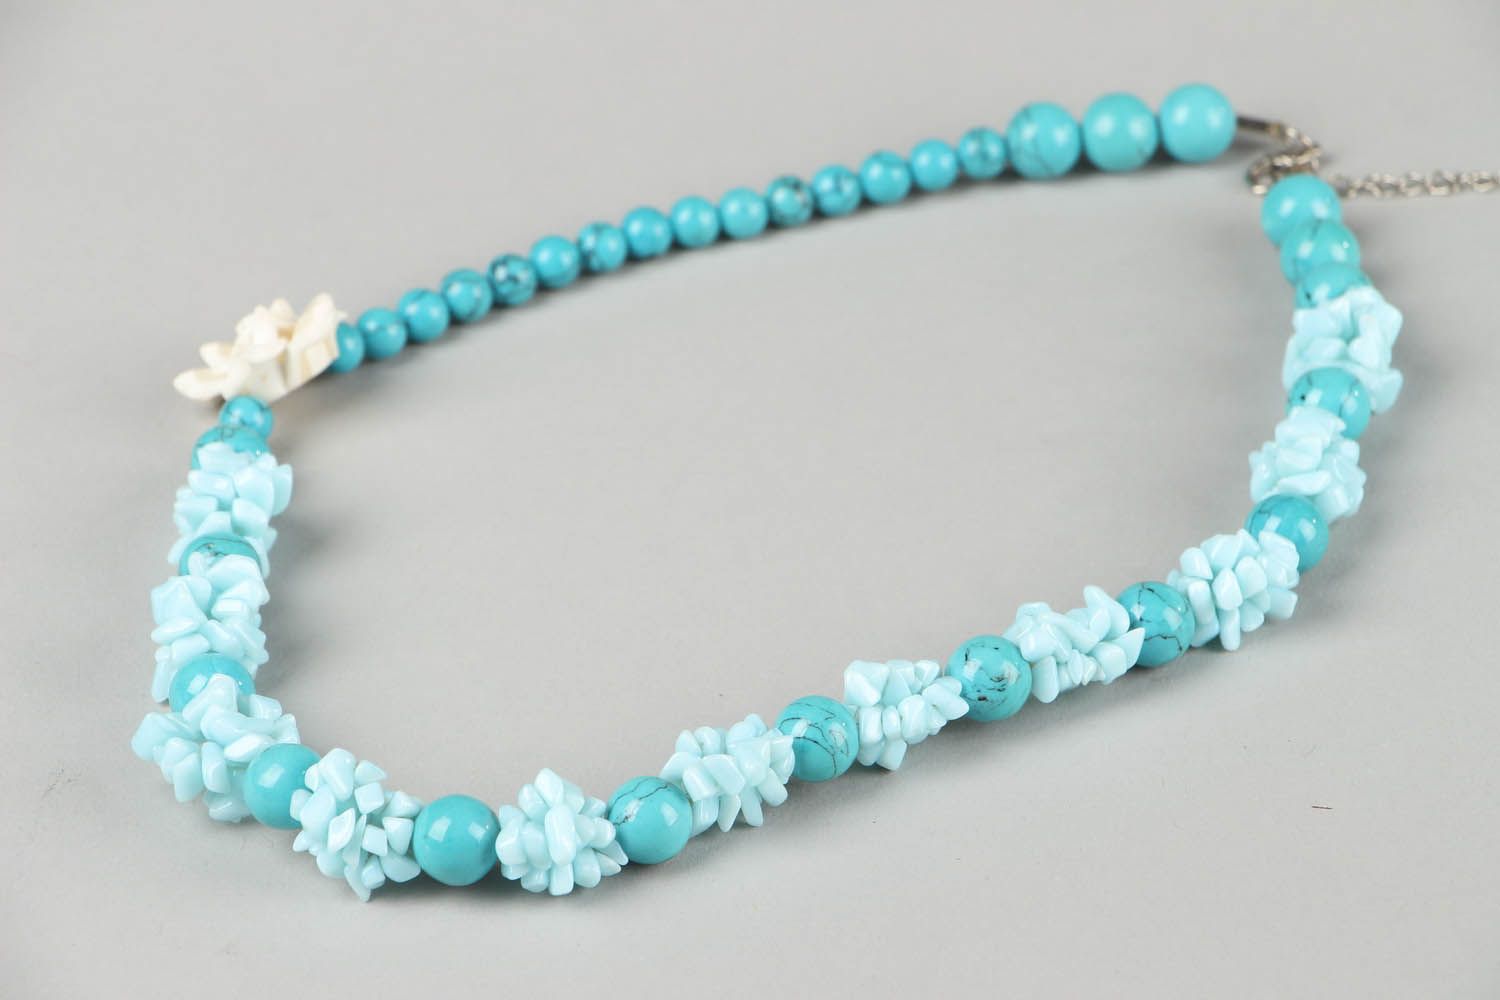 Bead necklace made of turquoise photo 2